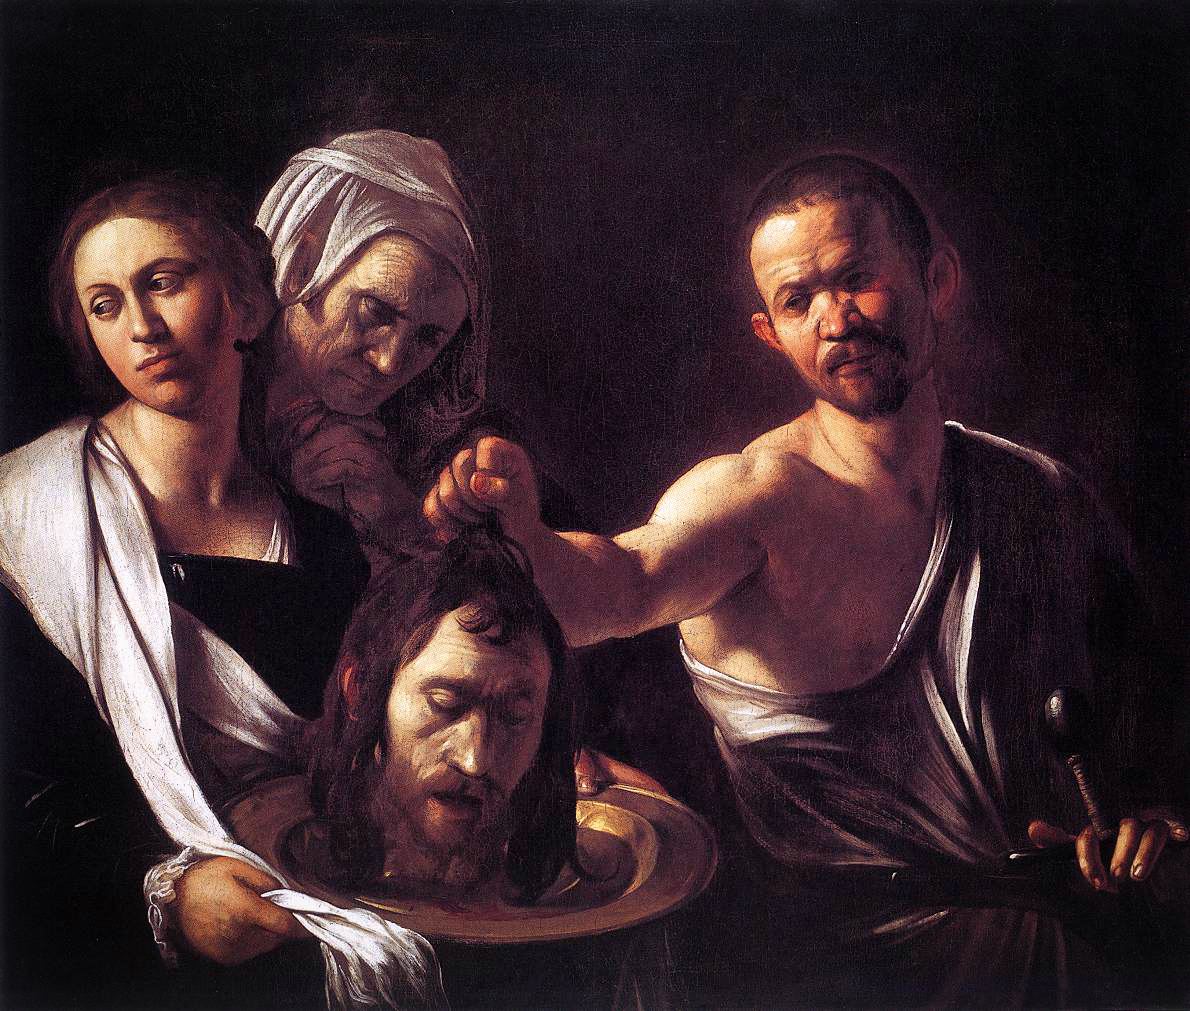 Salome with the head of St John the Baptist (1607), by Caravaggio